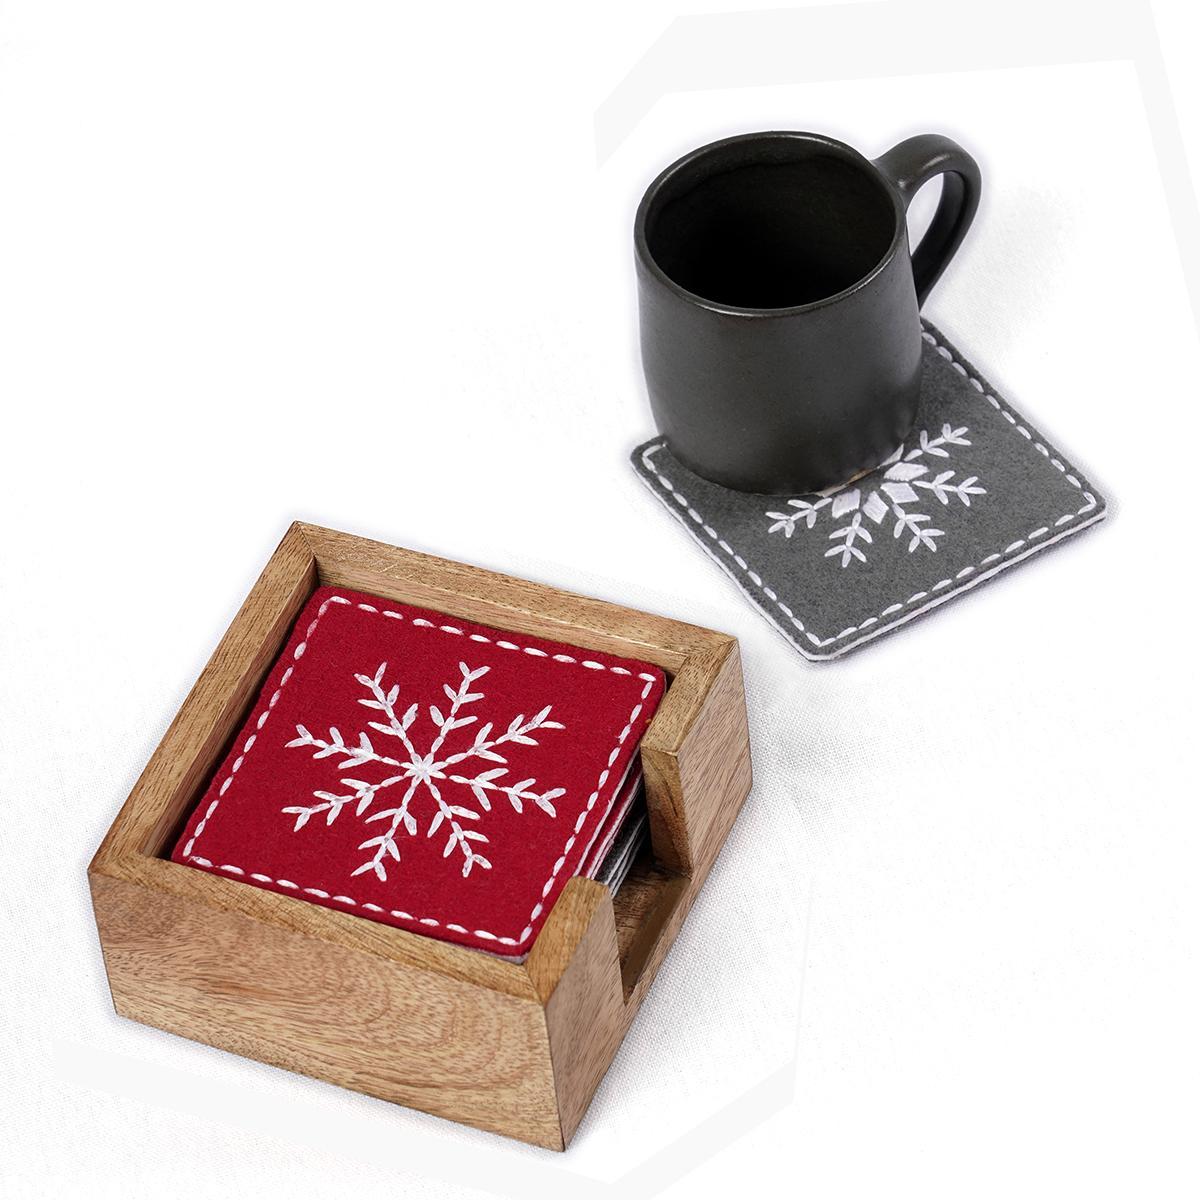 CHRISTMAS COASTER SET - Pack of 8 Felt embroidered coasters with wooden coaster box